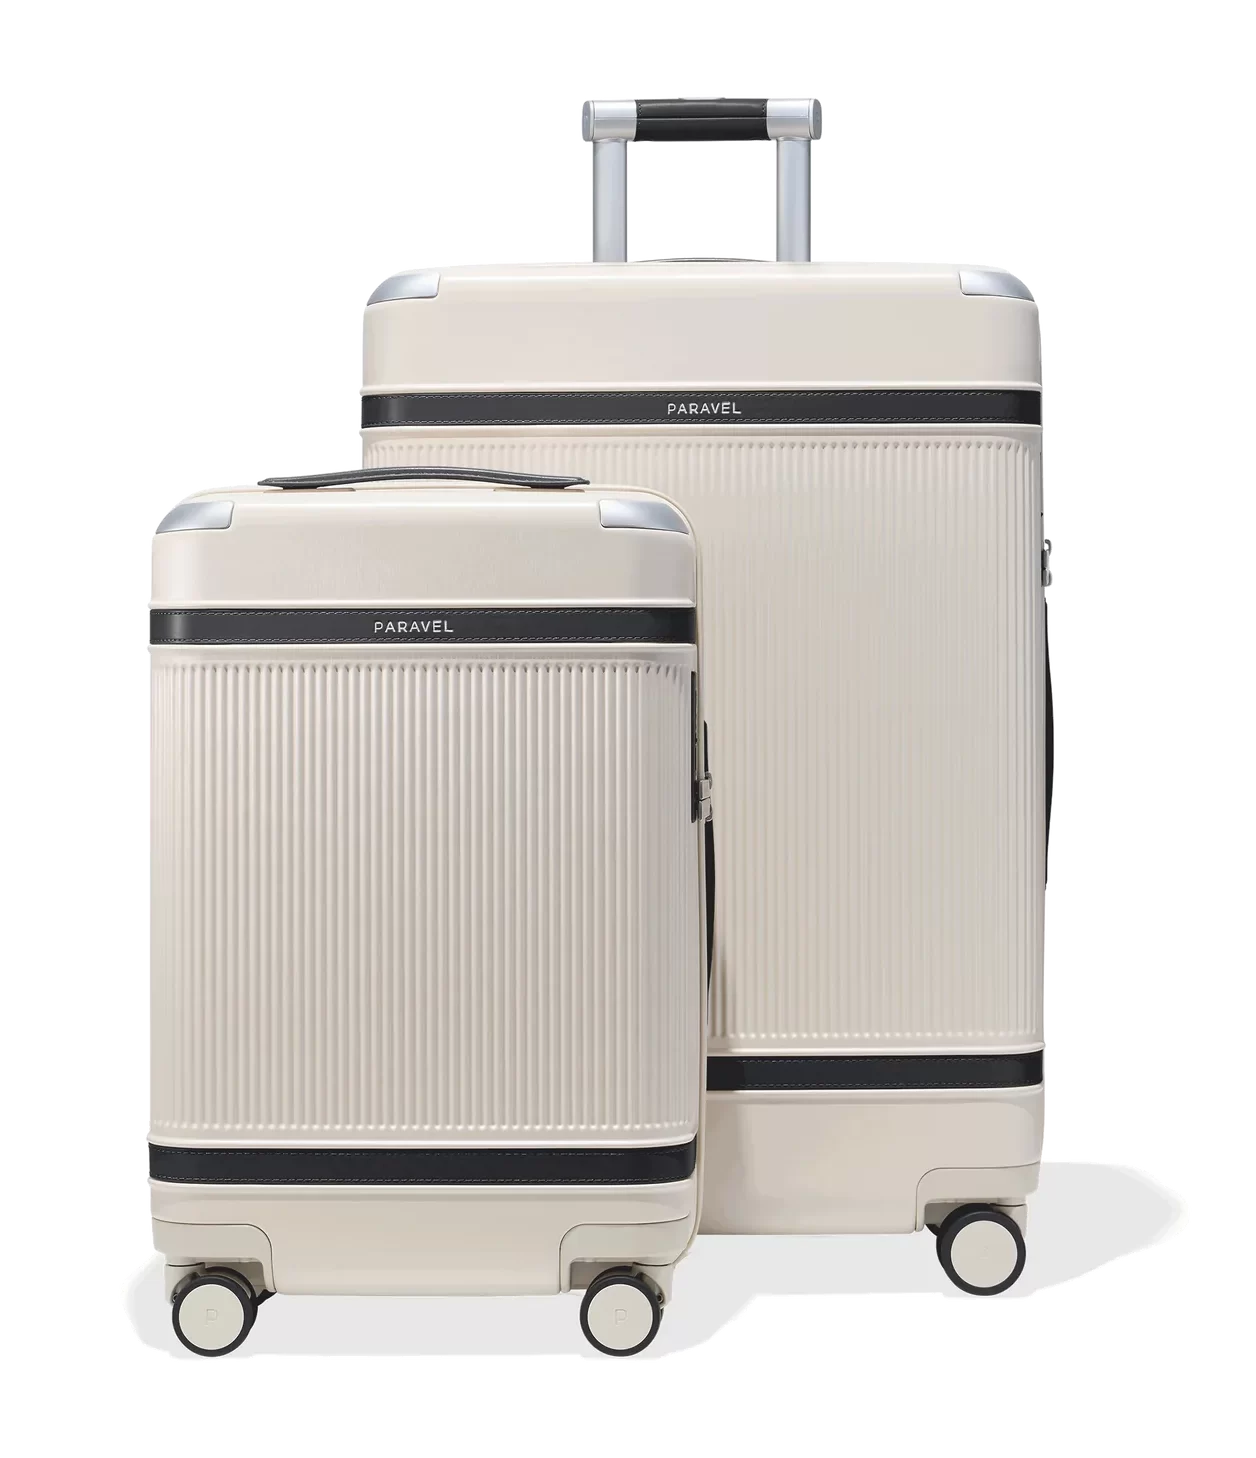 paravel domino white and black luggage gift set for travel lovers